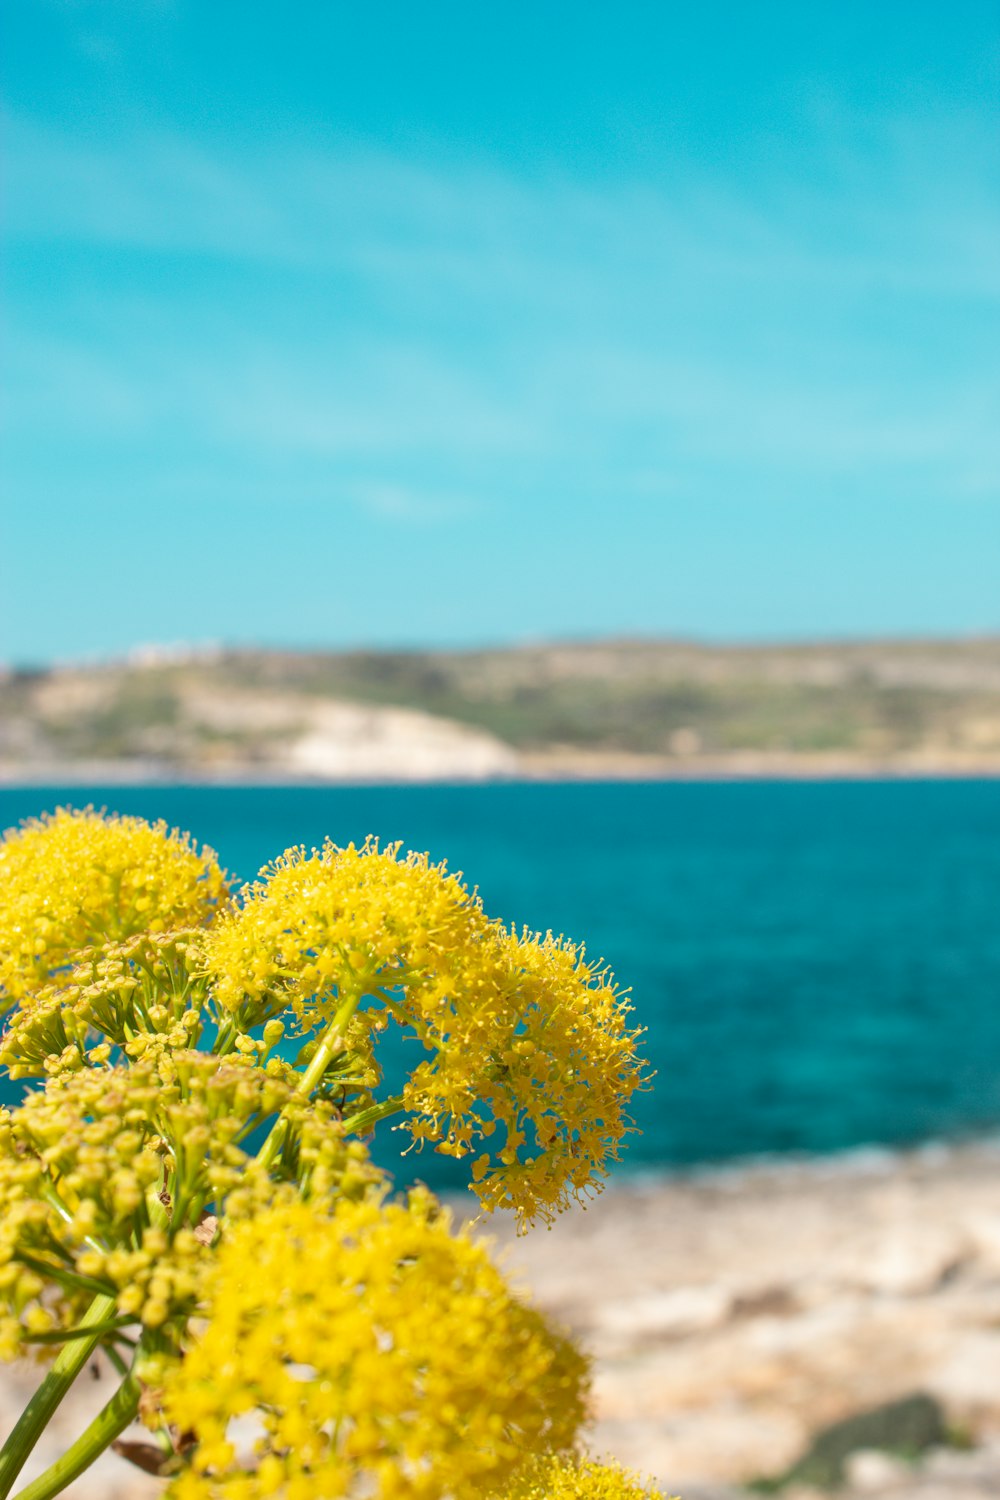 a close up of a yellow flower near a body of water